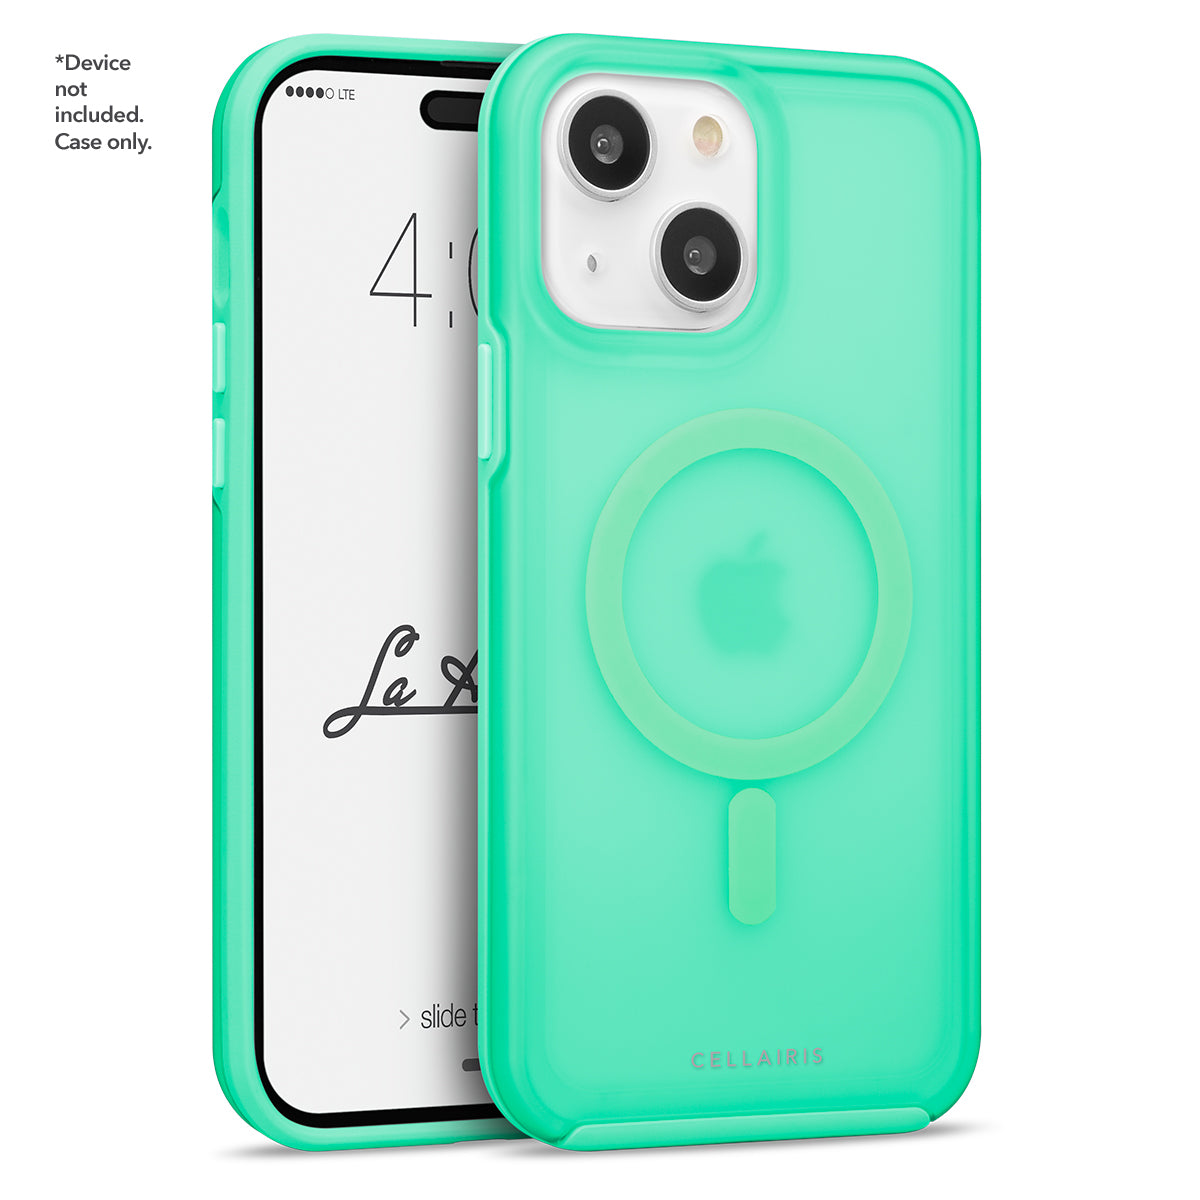 La Hornet Matte - iPhone 15 Turquoise w/ MagSafe Cases